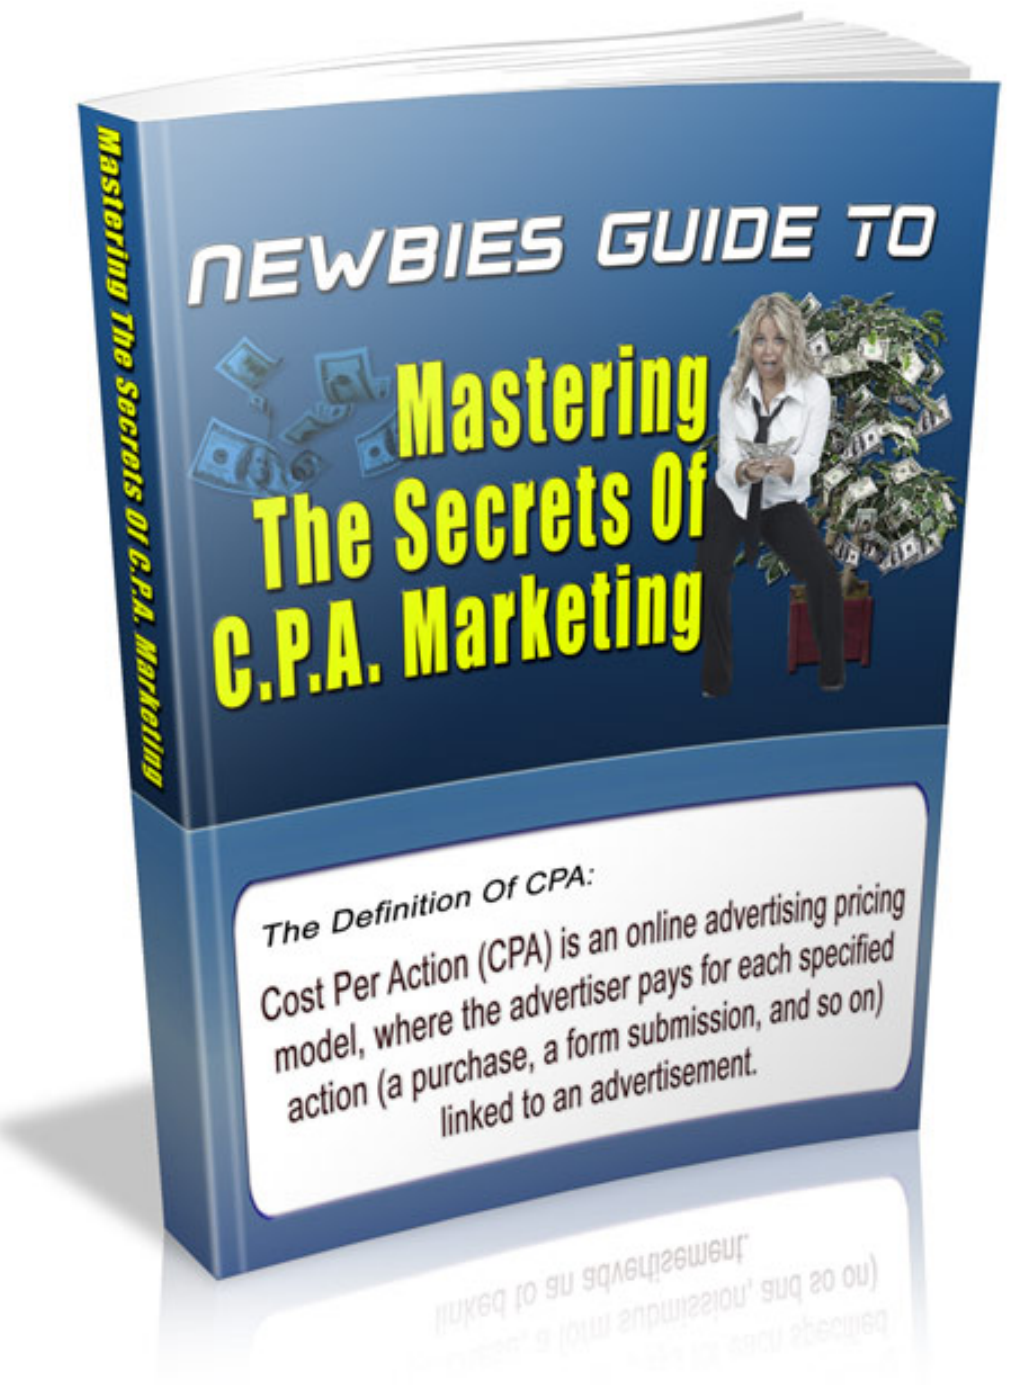 Newbies Guide to Mastering the Secrets of C.P.A. Marketing